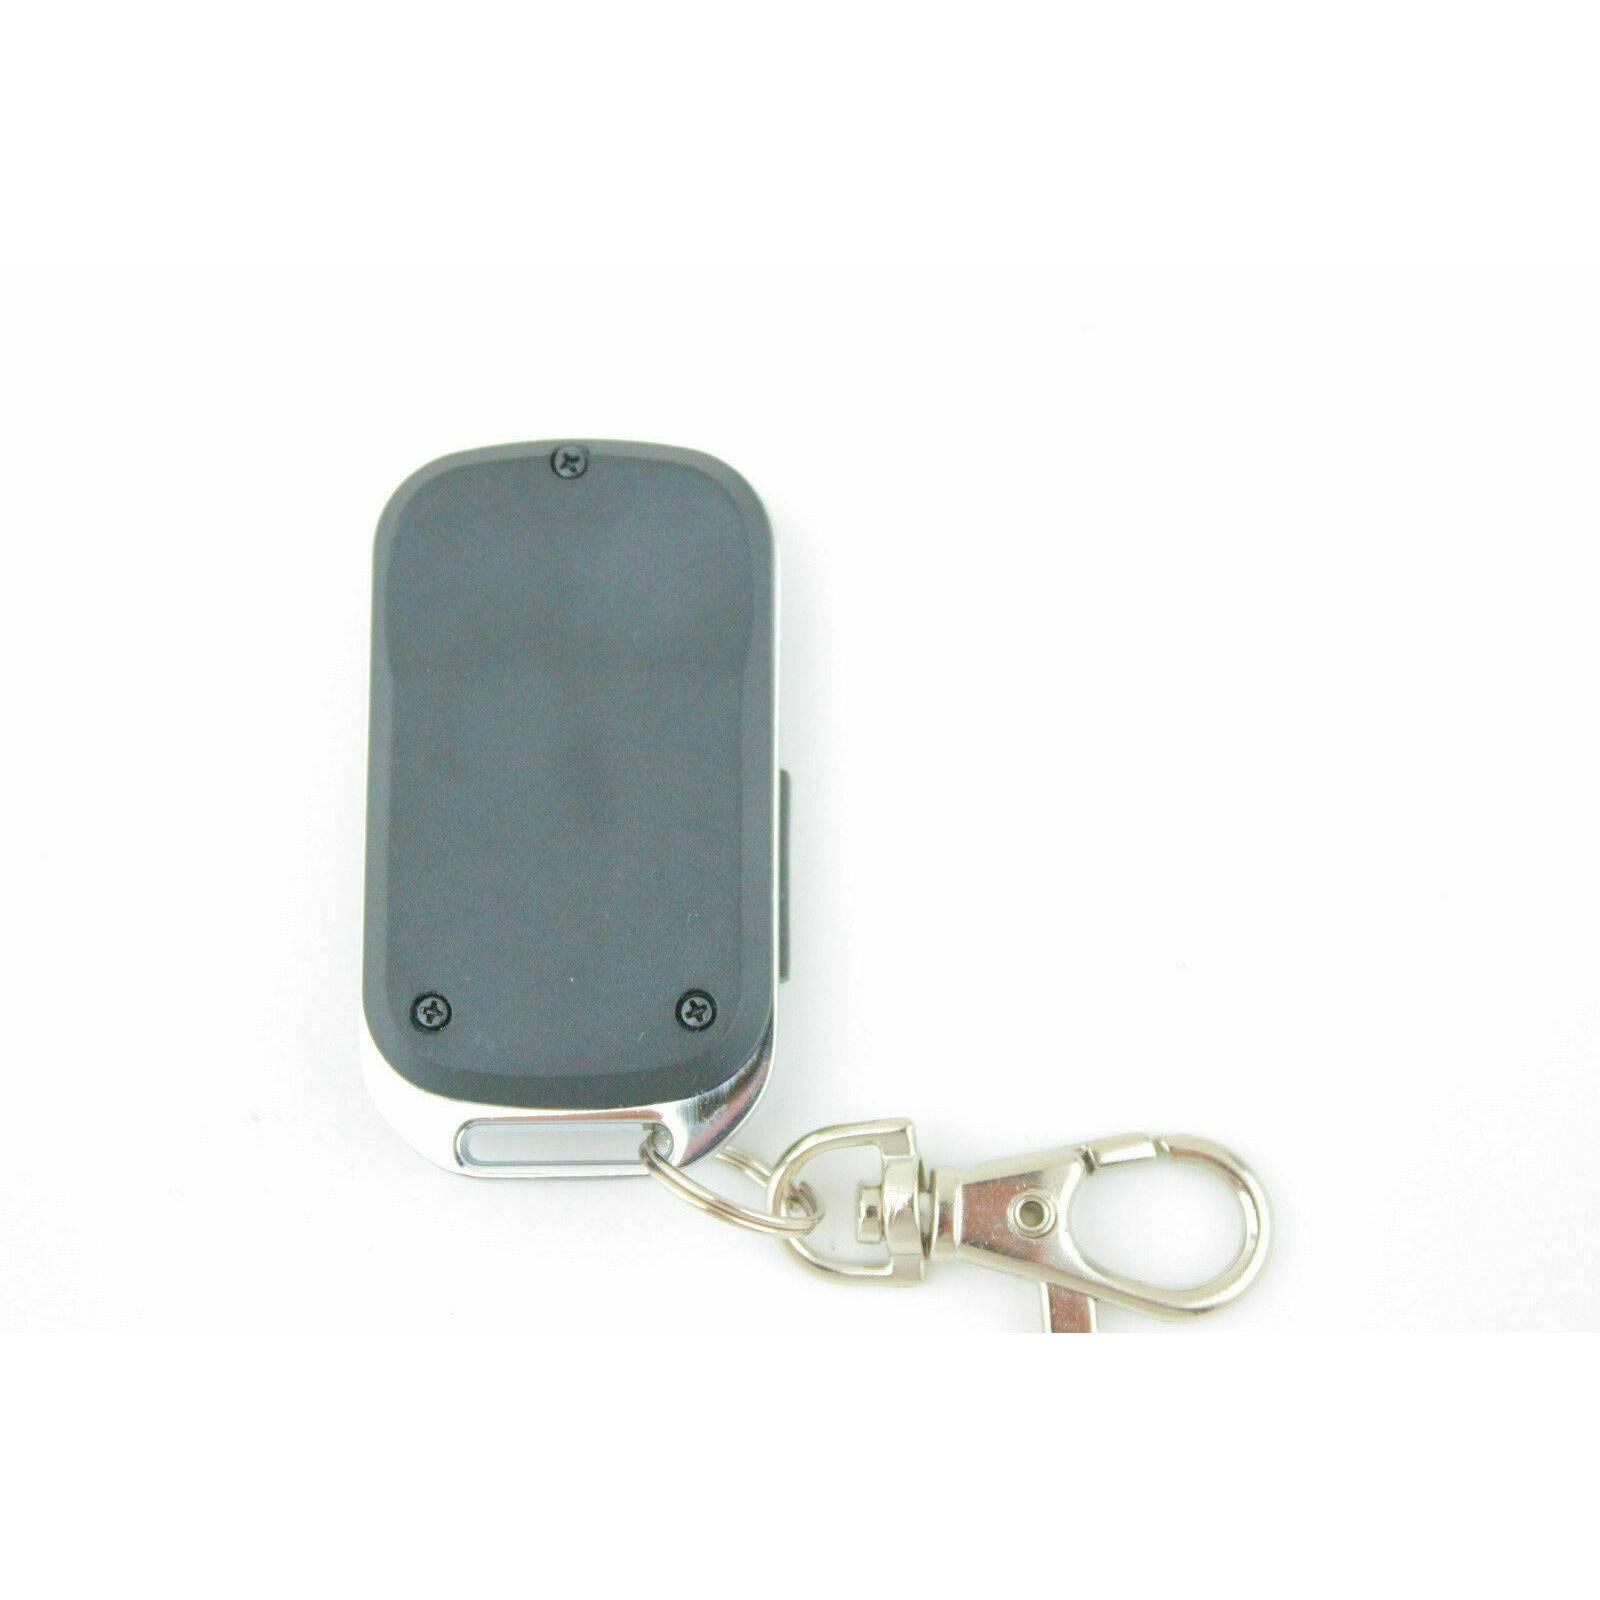 Mhouse/MyHouse Door Gate Remote Control Compatible TX4 TX3 GTX4 433.92mhz - The Remote Factory